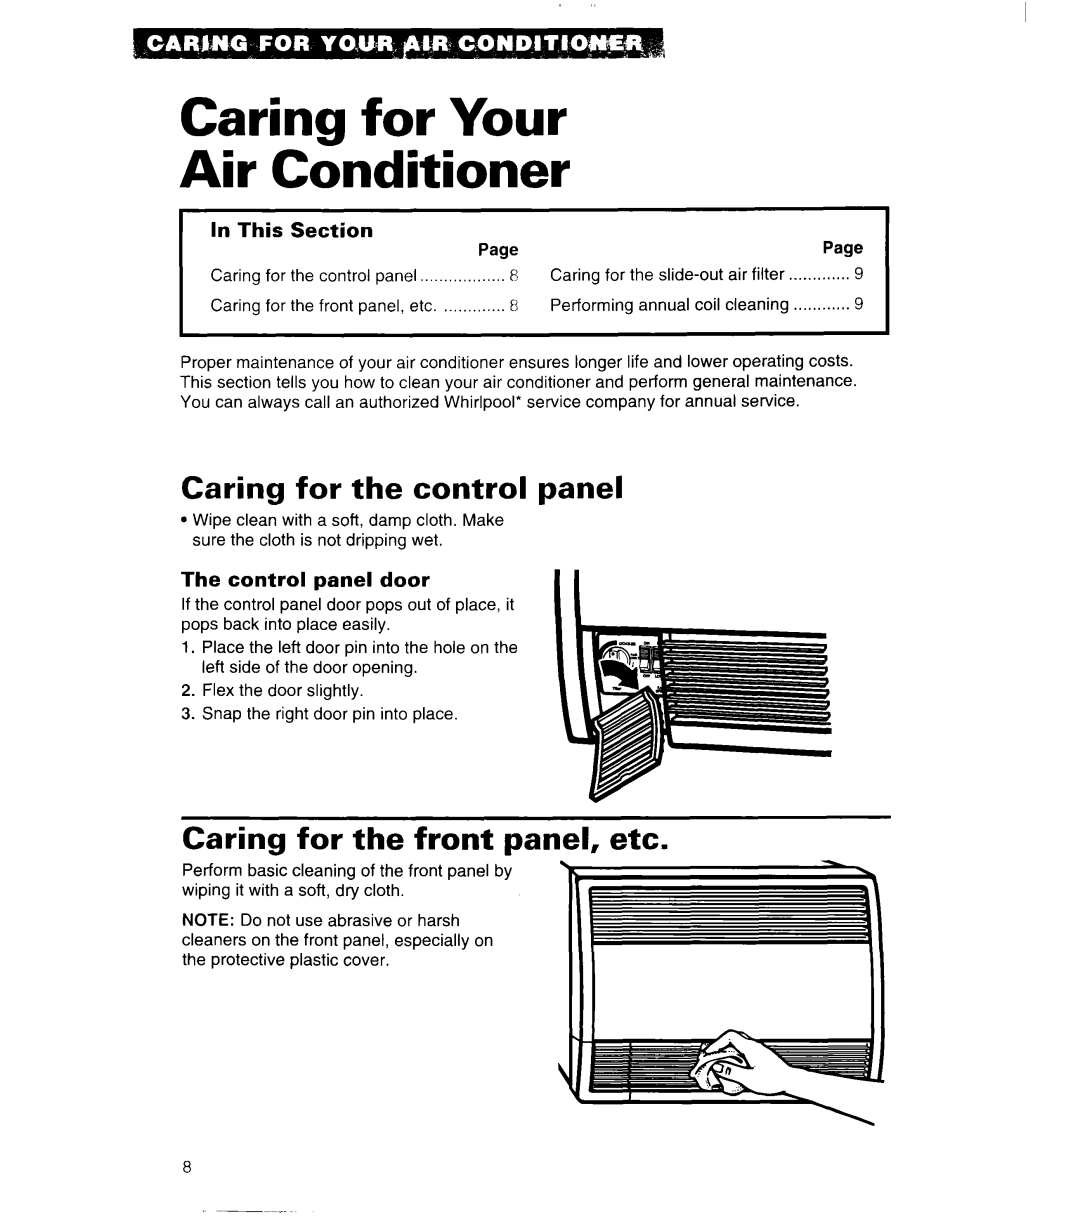 Whirlpool 3QACM07XD2 Caring for Your Air Conditioner, Caring for the control panel, Caring for the front panel, etc 